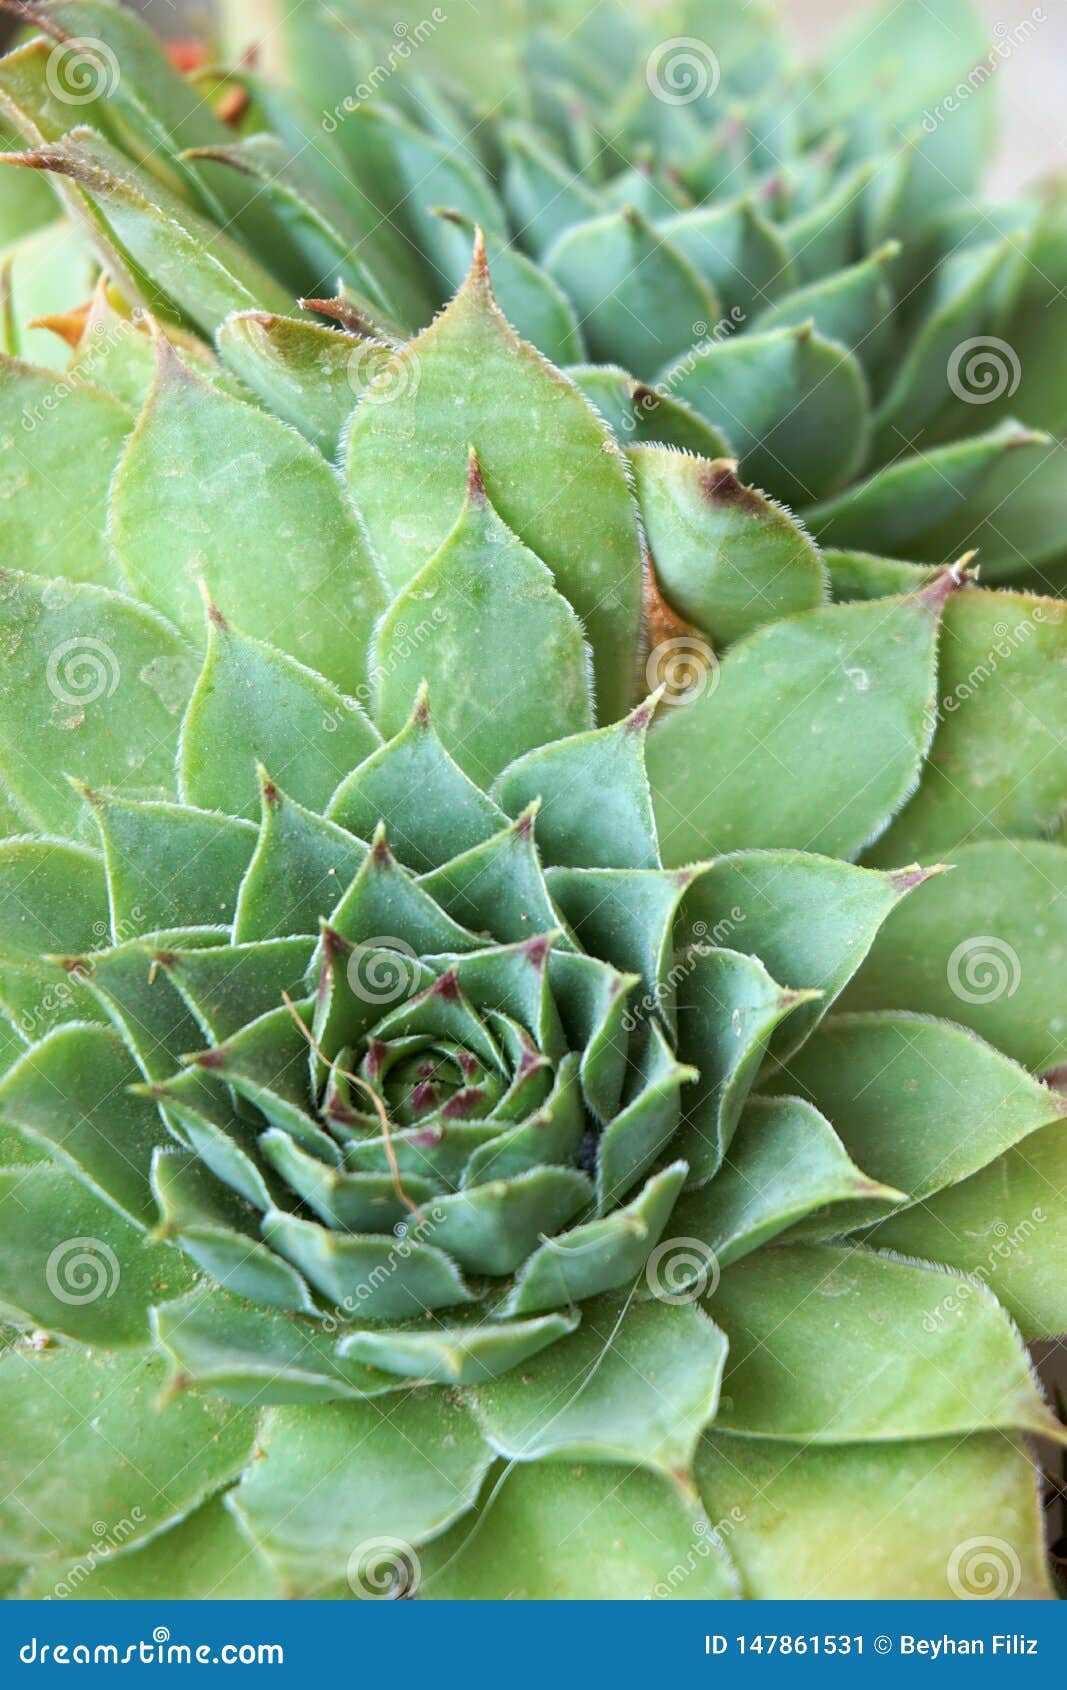 Close up View Of Common  Houseleek  Or Succulent Plant  